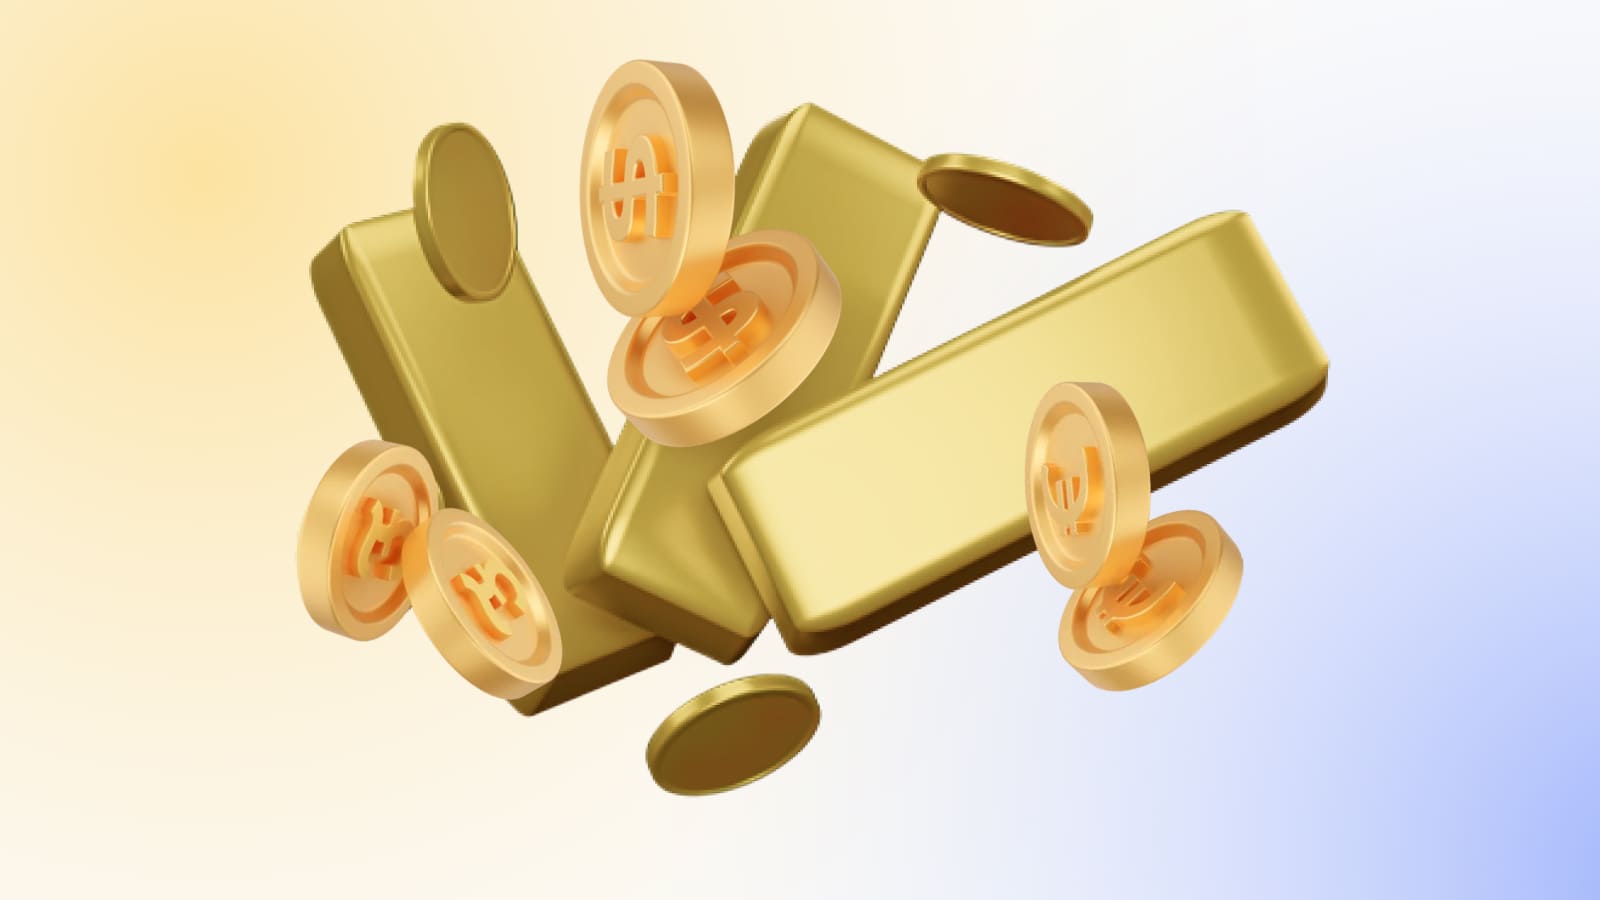 Centralized stablecoins can be backed by gold or fiat.